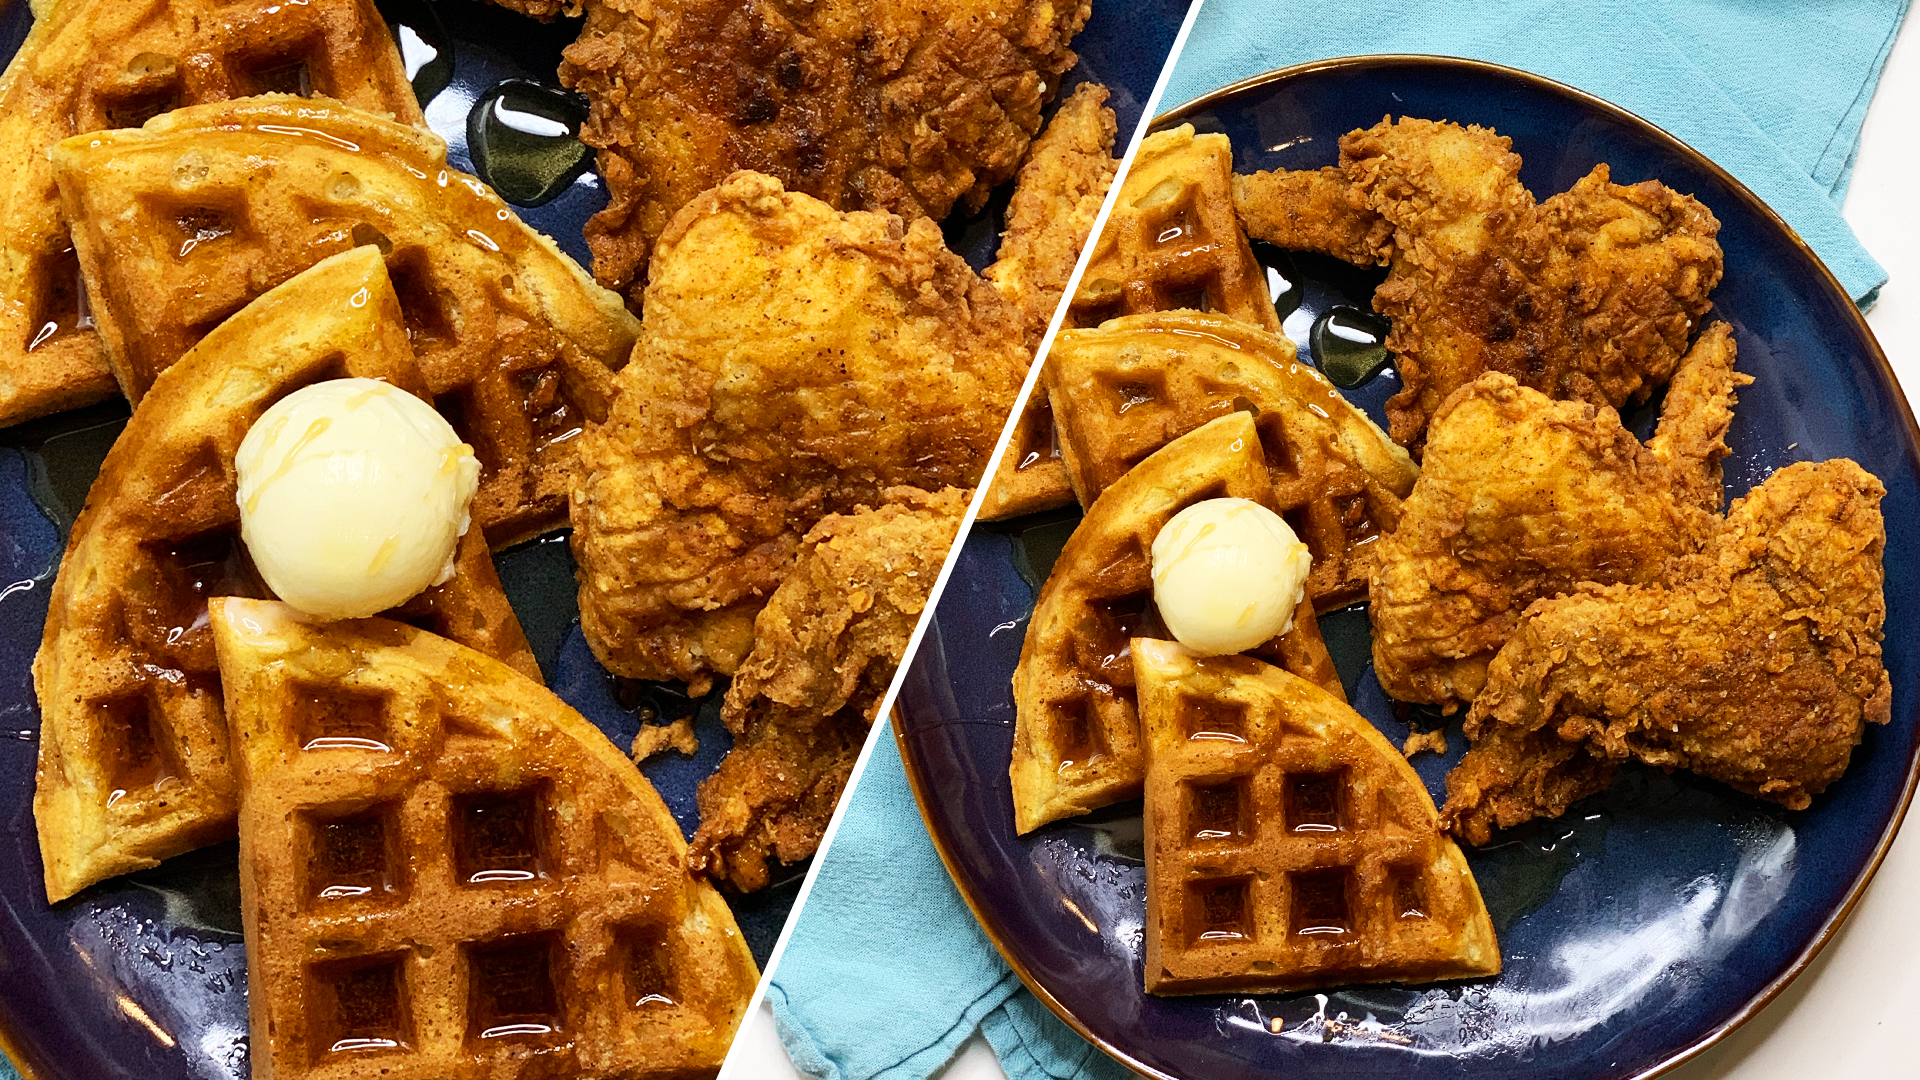 Fried Chicken And Waffles As Made By Breana Jackson Recipe By Tasty